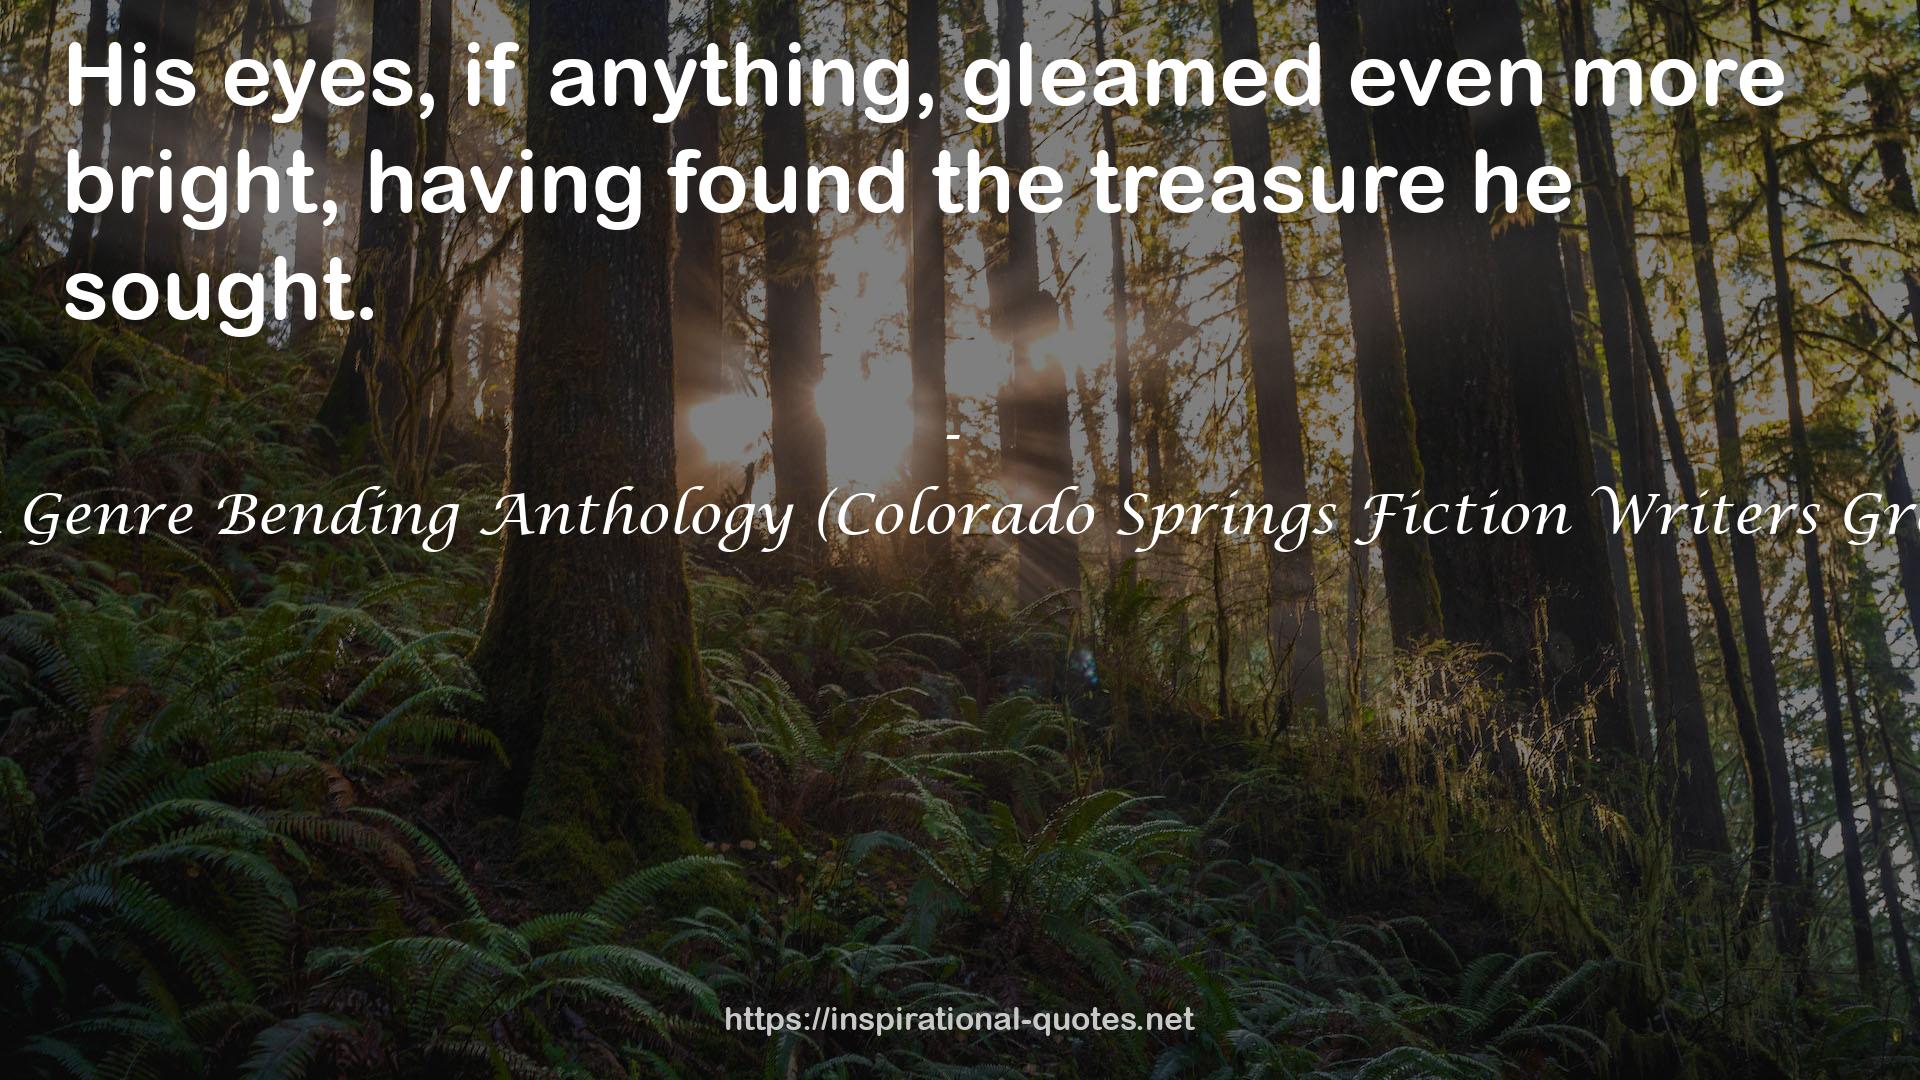 Prismatic Prose: A Genre Bending Anthology (Colorado Springs Fiction Writers Group Anthology, #4) QUOTES